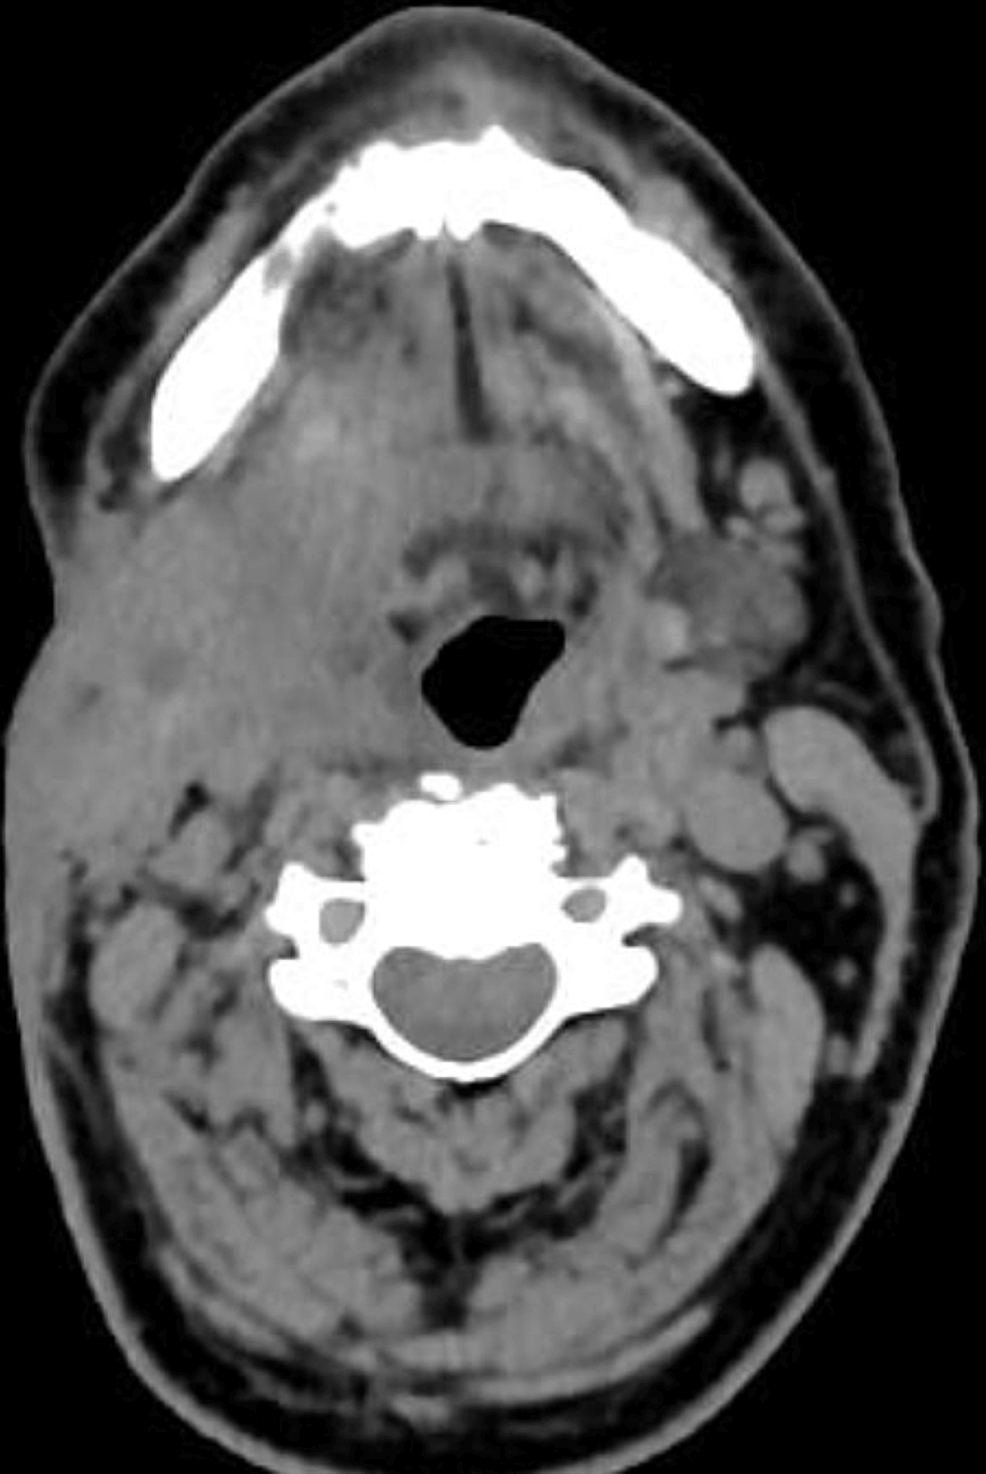 Scannographic-presentation-of-the-right-submandibular-swelling-(heterogeneous-mass-with-irregular-contours-extending-into-the-right-parapharyngeal-space-and-palatine-fossa).